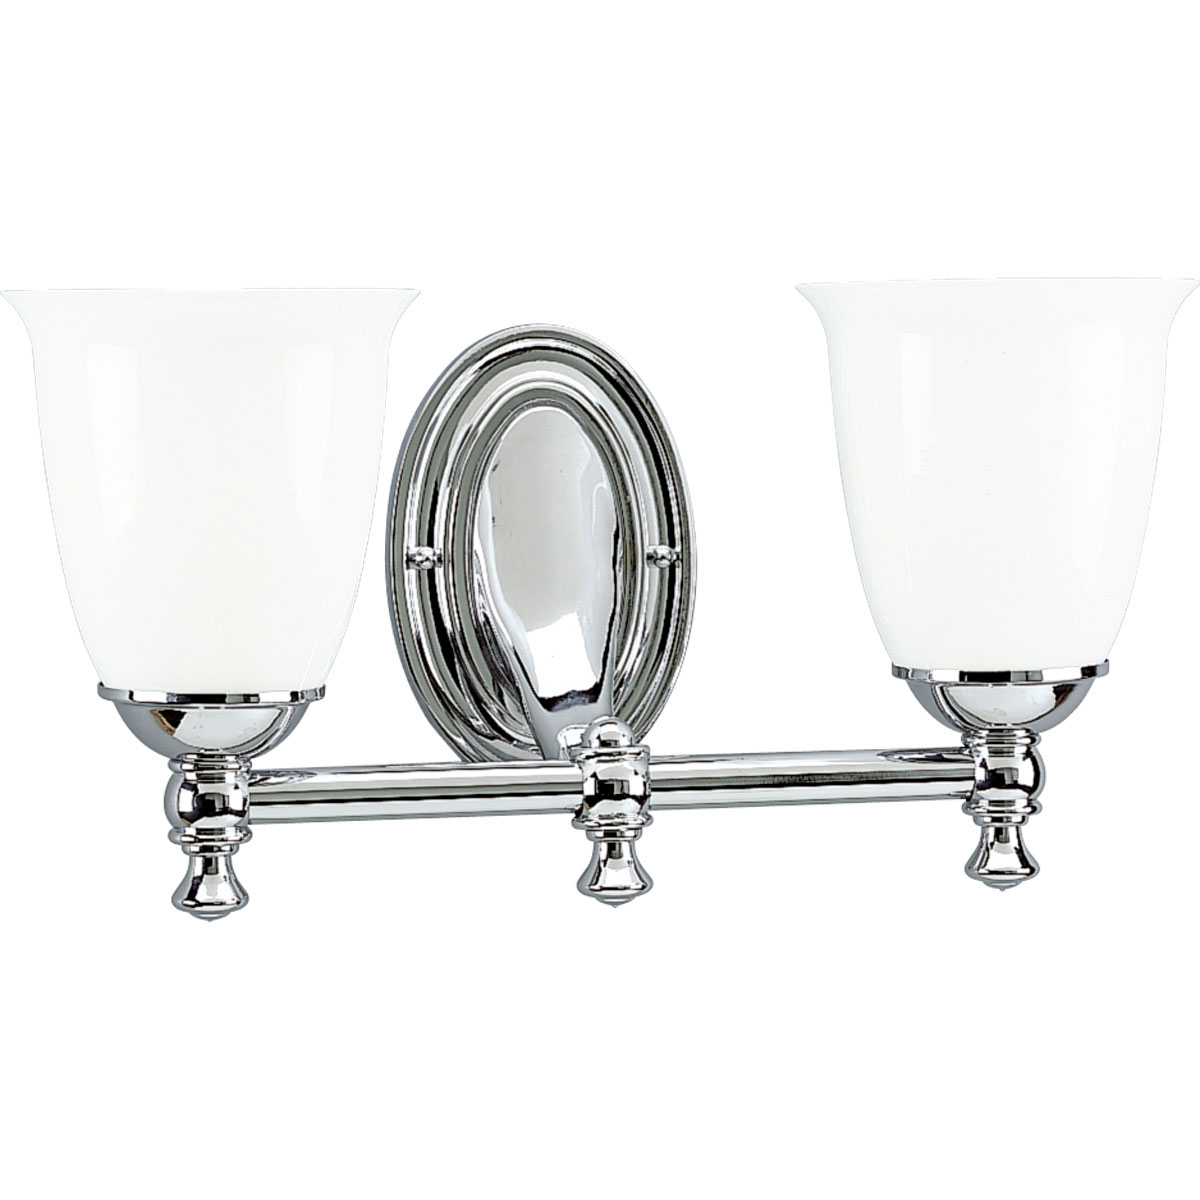 Feeling nostalgic for simpler times, The Victorian Collection helps you create a vintage look in any room. This Polished Chrome two-light bath fixture is boldly simple with pure white, triplex opal glass shades and precise metal fittings. Coordinates with Delta Faucet fixtures to provide a whole-room decorating solution. This fixture can be installed with the glass facing up or down to suit your preference.